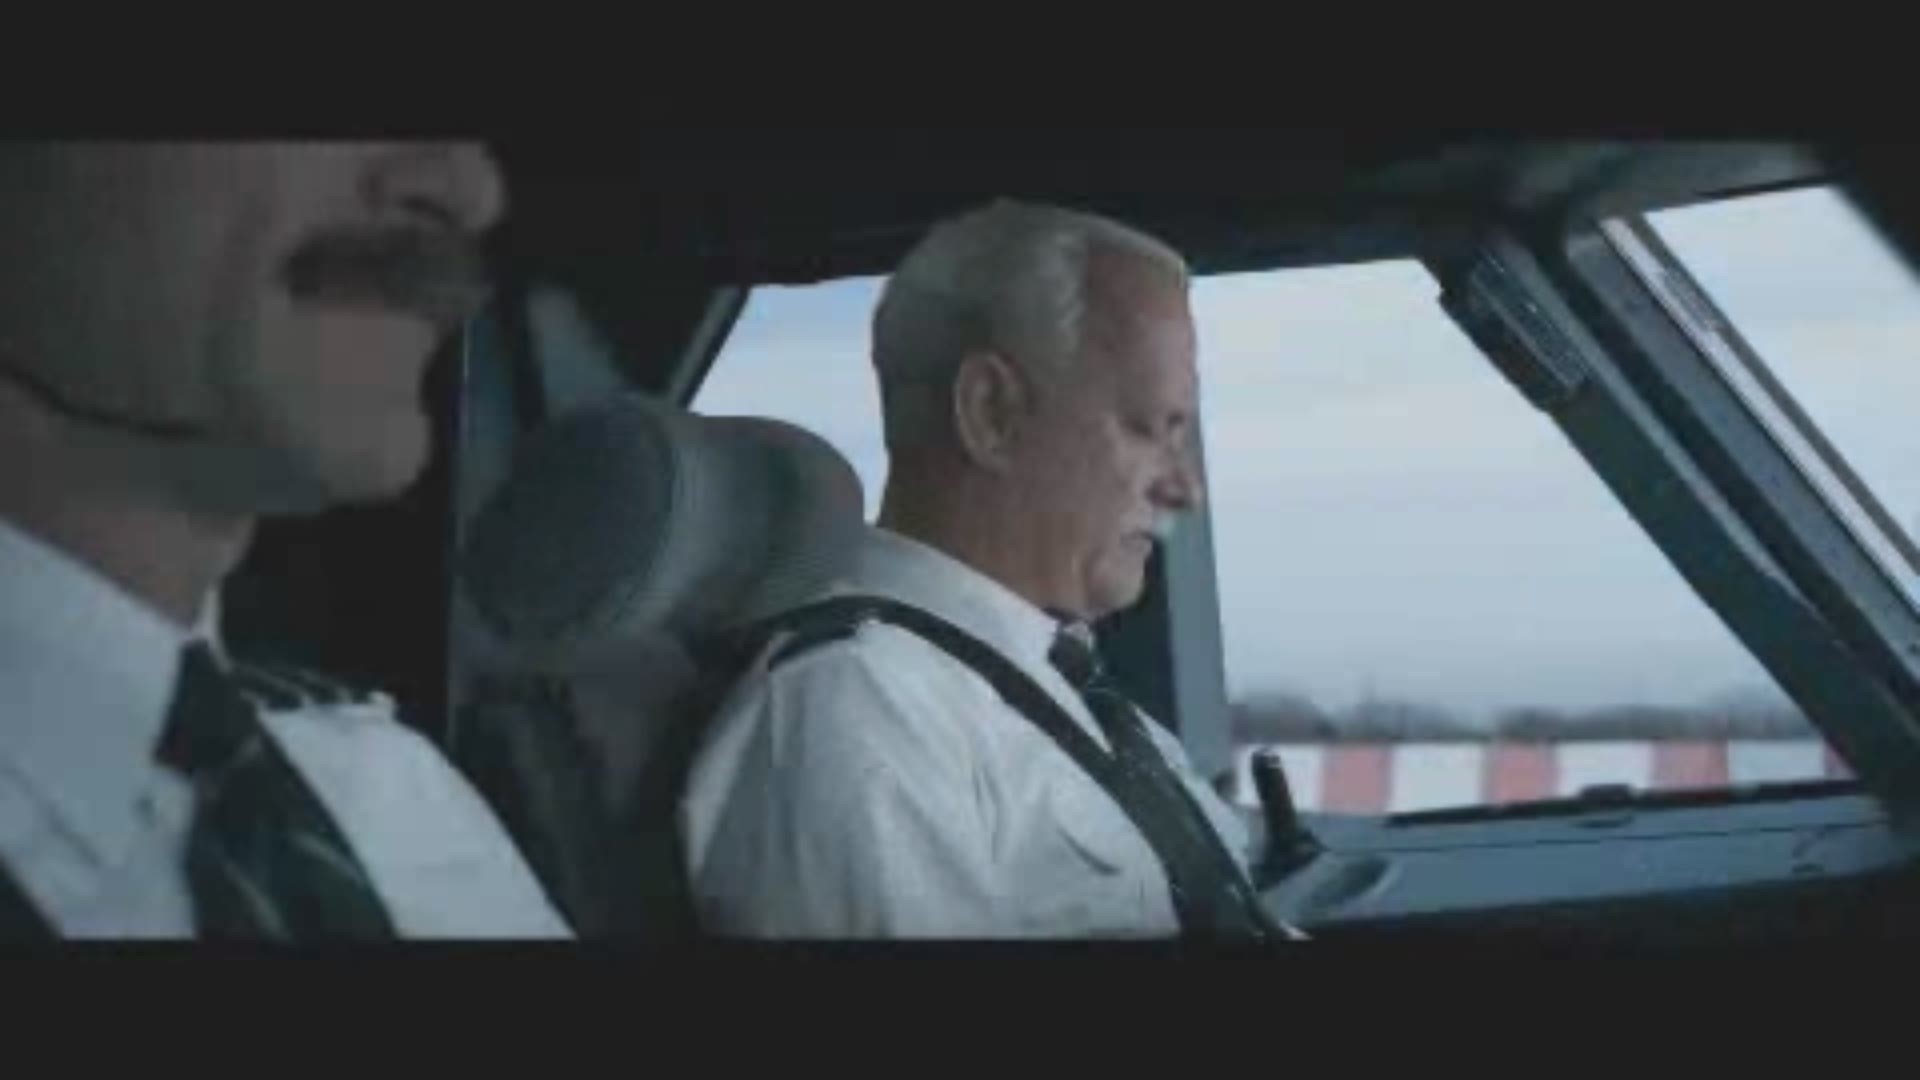 Tom Hanks is in control in "Sully." He plays the real-life Captain Chesley Sullenberger, who safely landed a passenger jet on the Hudson River after a catastrophic bird strike. (Clips: Warner Bros)